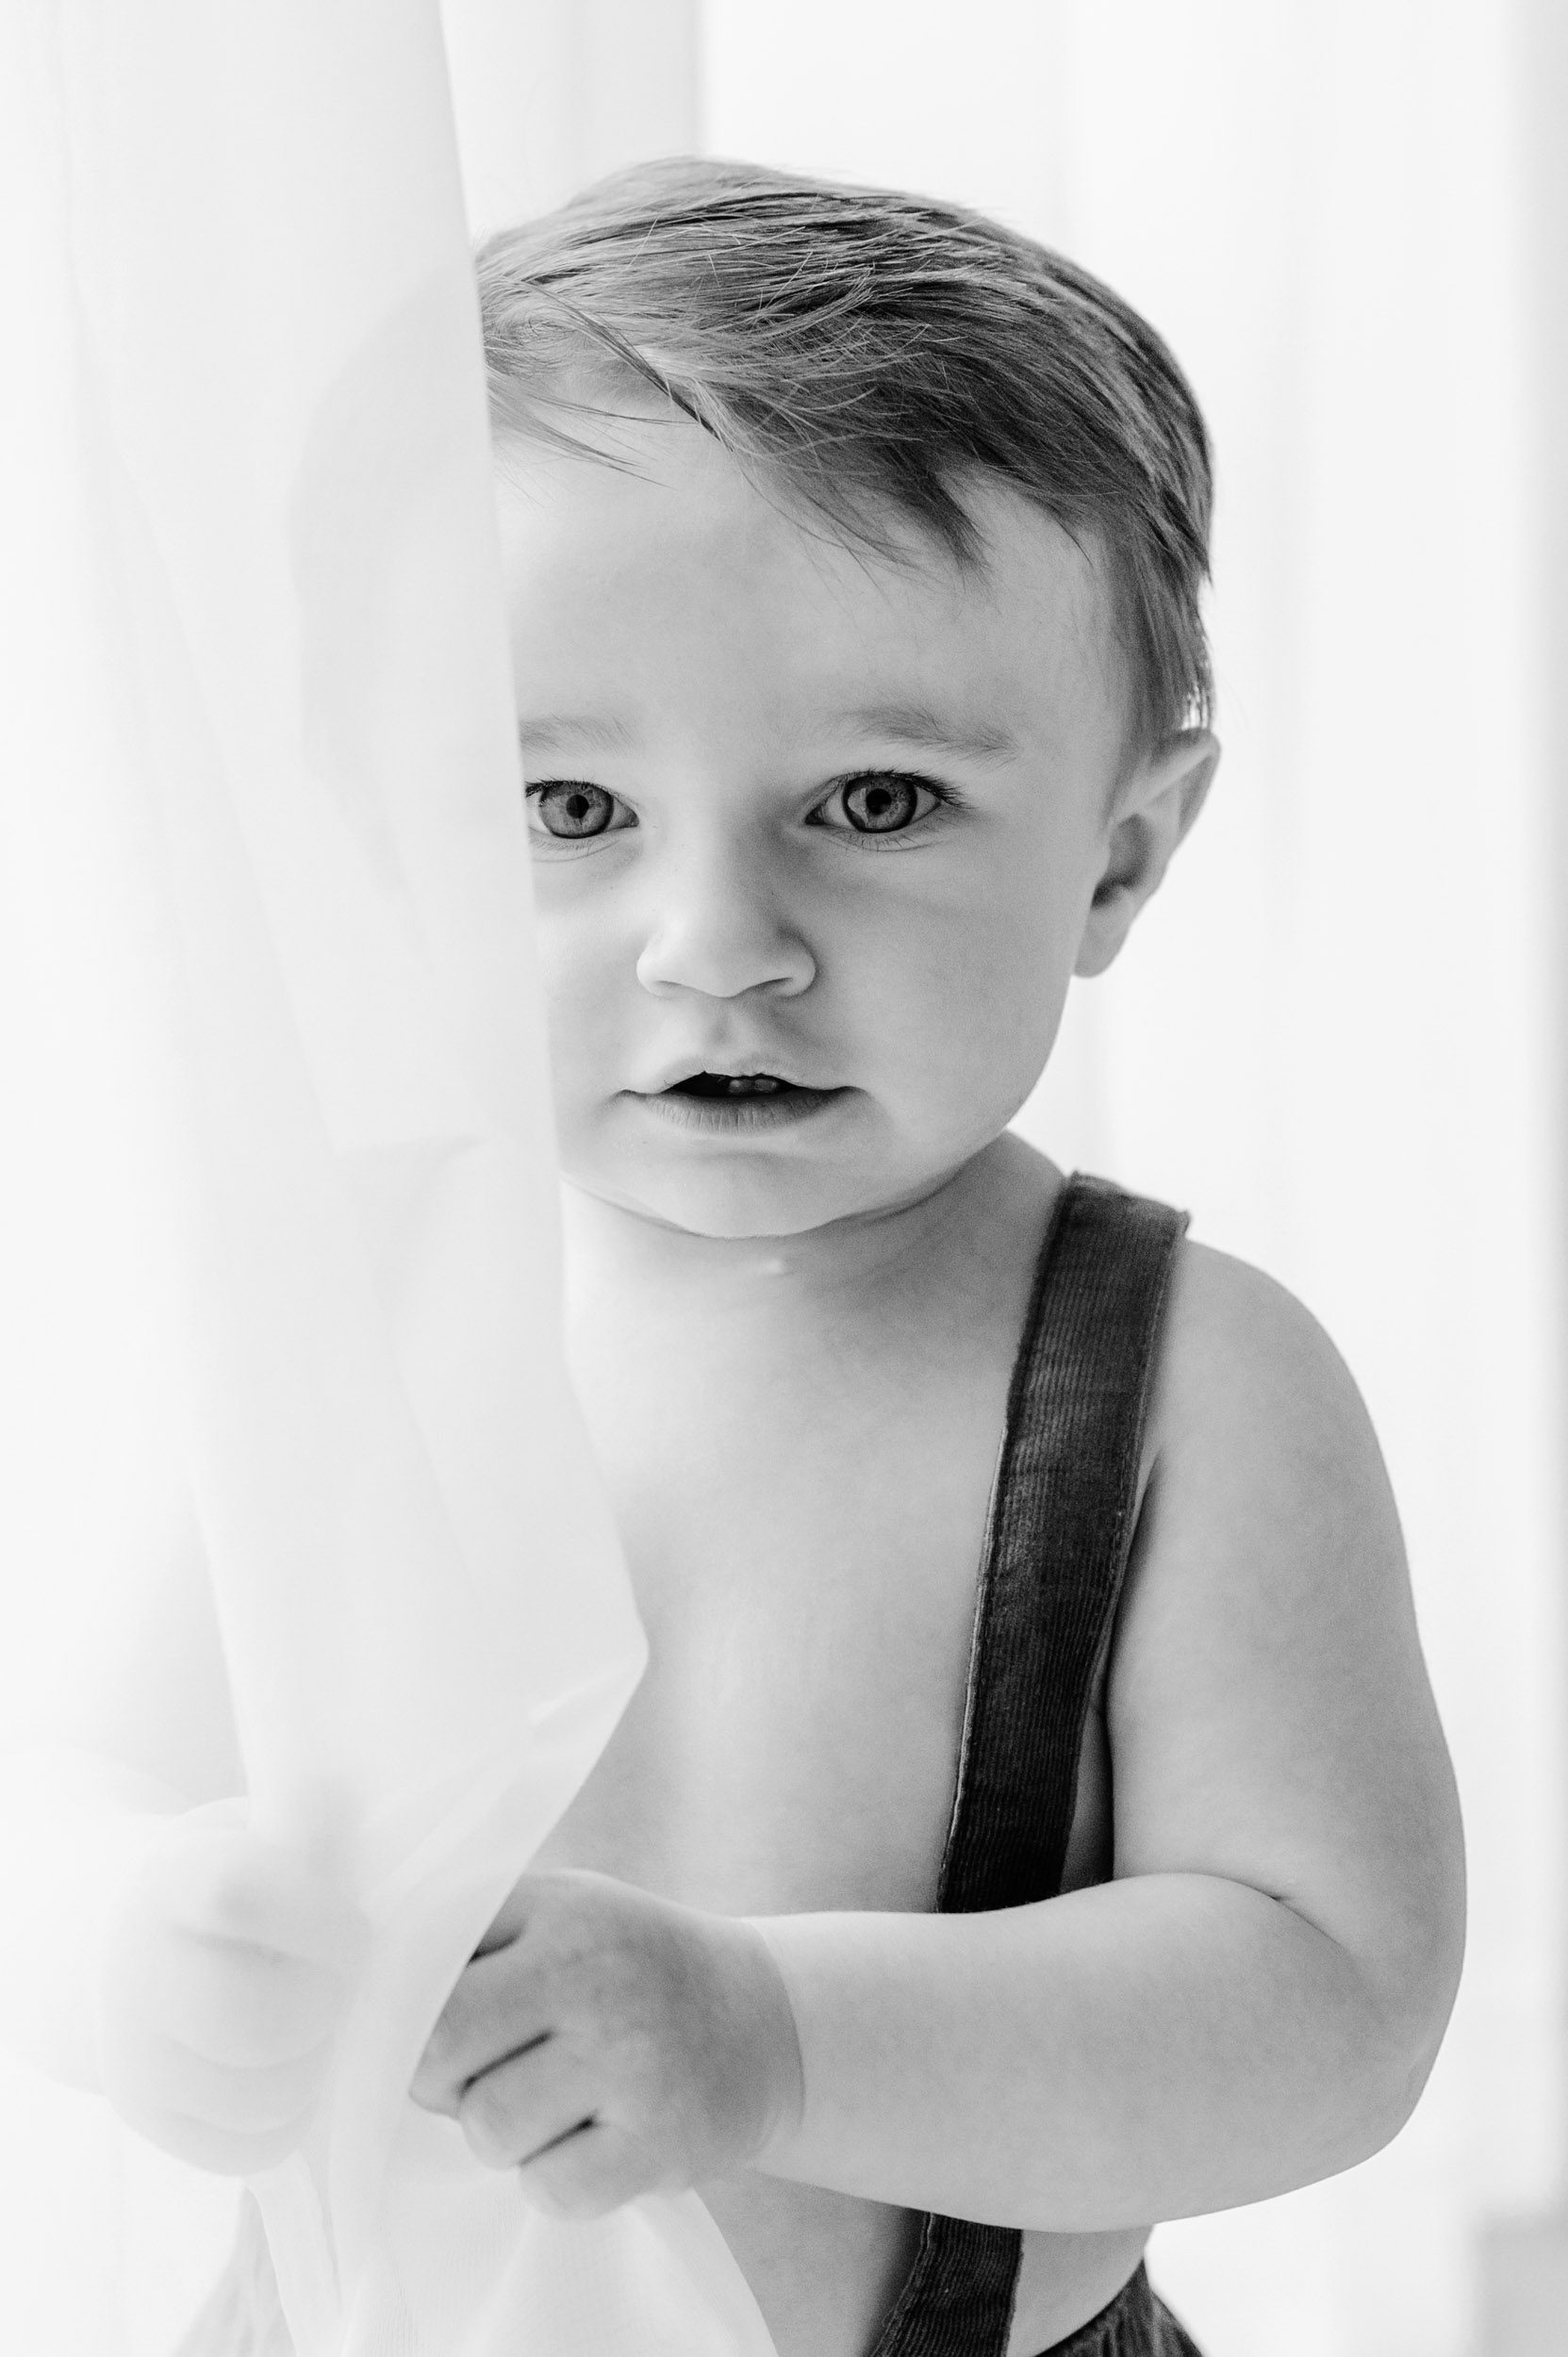 a black and white picture of a young boy holding a sheer curtain in his hand and peeking out from behind it looking directly at the camera during a Pottstown toddler milestone photography session